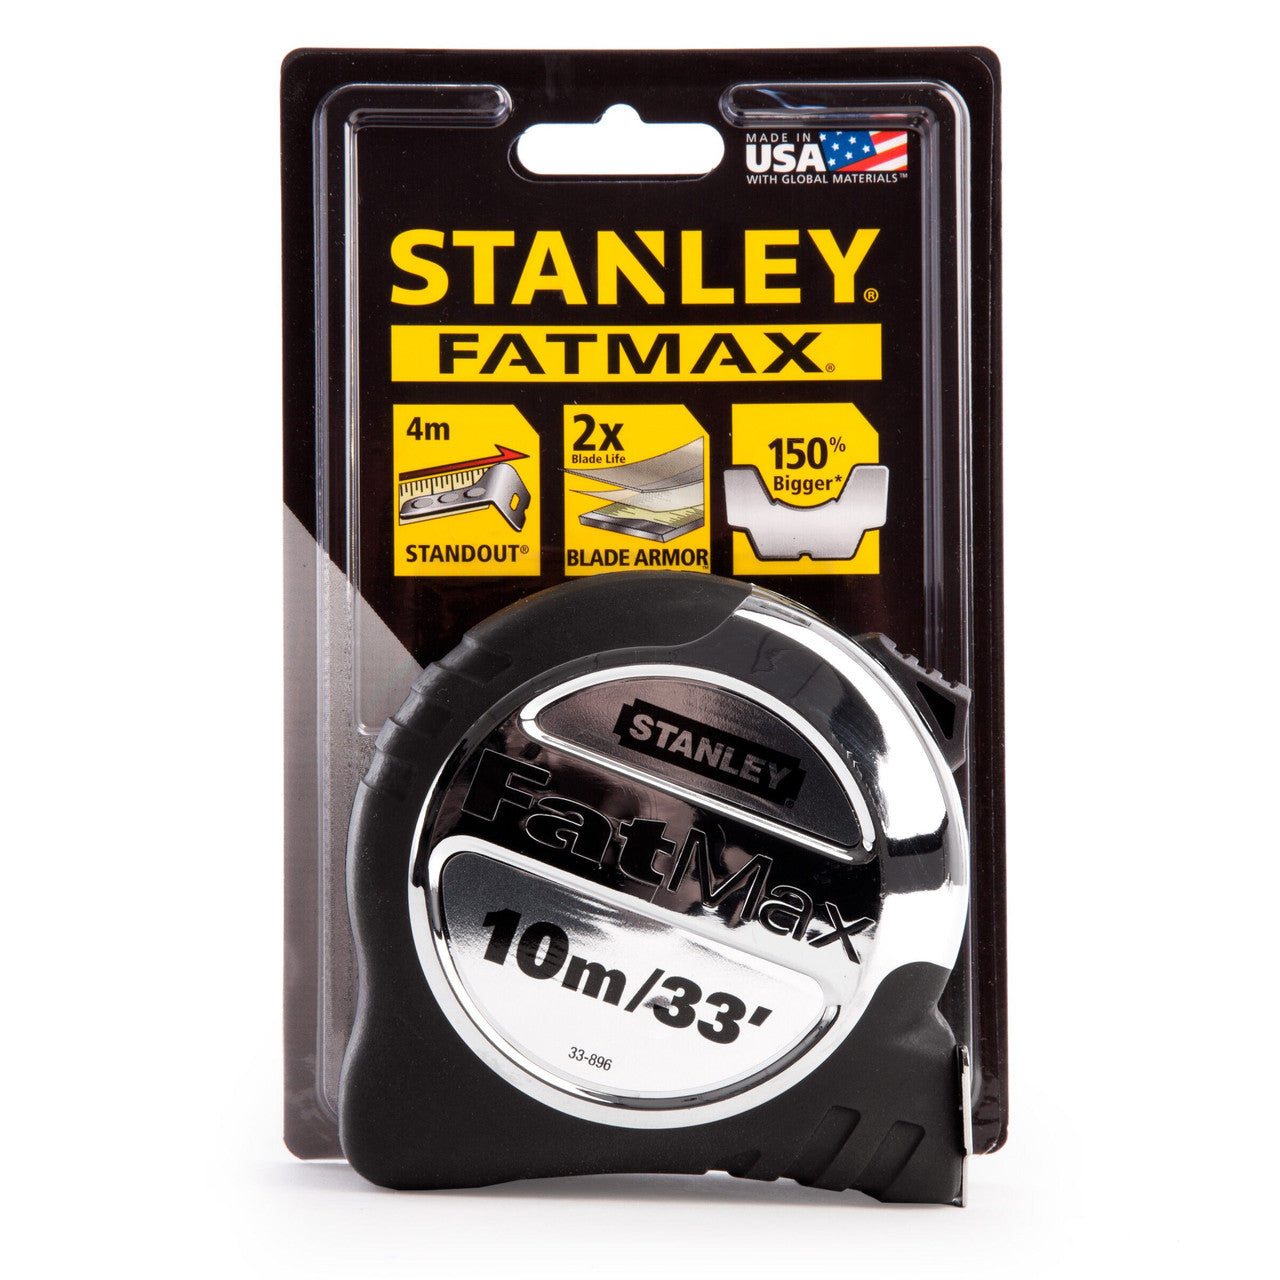 Stanley 5-33-896 FatMax Xtreme Metric/Imperial Tape Measure with Blade Armor 10m